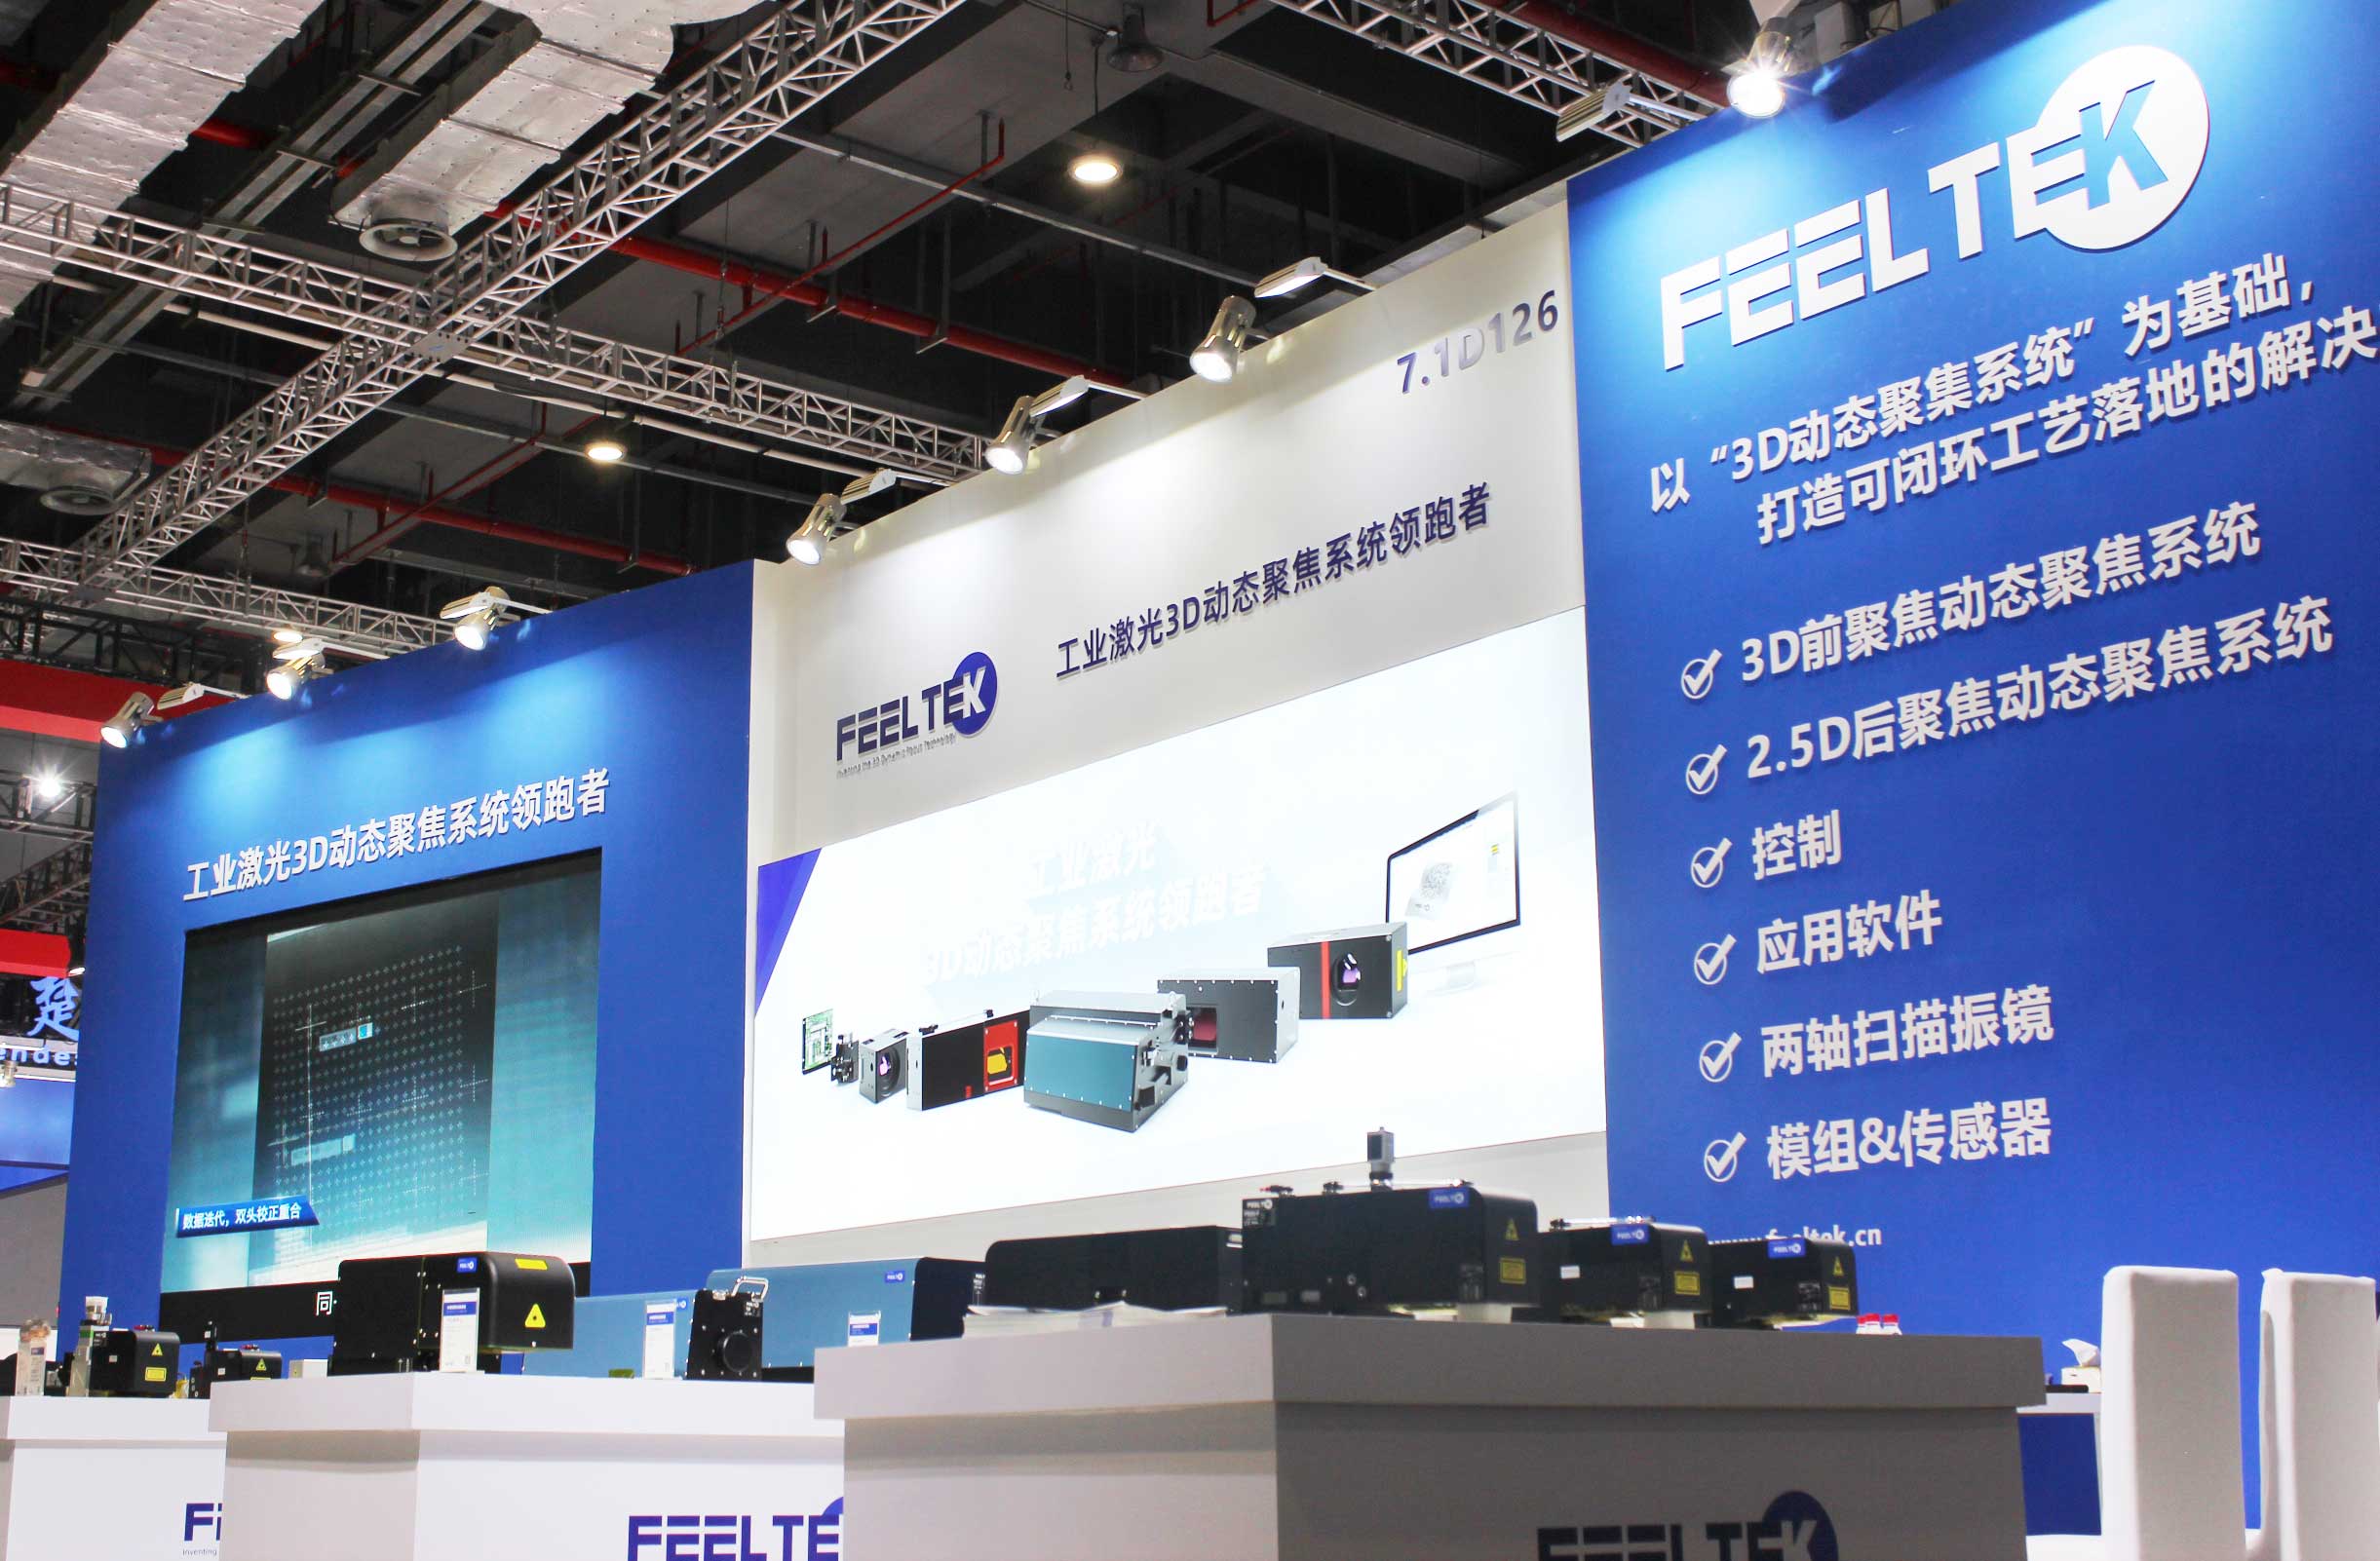 FEELTEK Laser Photonics China came to a successful conclusion